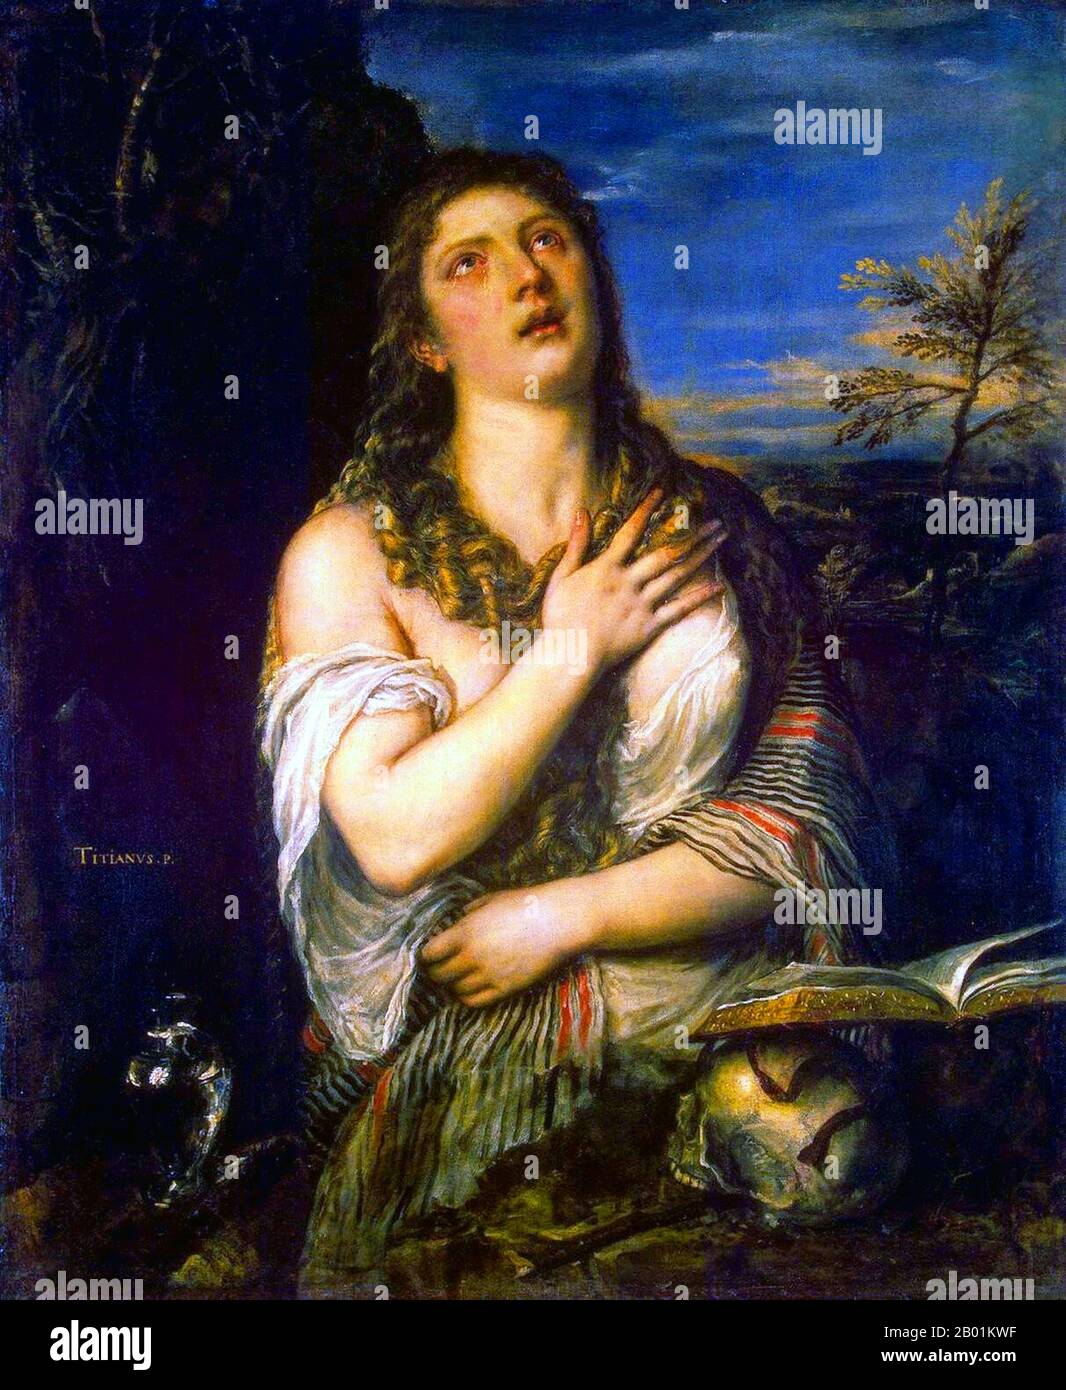 Italy: 'Repentant Mary Magdalene'. Oil on canvas painting by Titian (1490 - 27 August 1576), c. 1565.  Mary Magdalene was one of Jesus' most celebrated disciples, and the most important woman disciple in the movement of Jesus. Jesus cleansed her of 'seven demons', [Luke 8:2] [Mark 16:9] conventionally interpreted as referring to complex illnesses. She became most prominent during his last days, being present at the cross after the male disciples (excepting John the Beloved) had fled, and at his burial. She was the first person to see Jesus after his Resurrection. Stock Photo